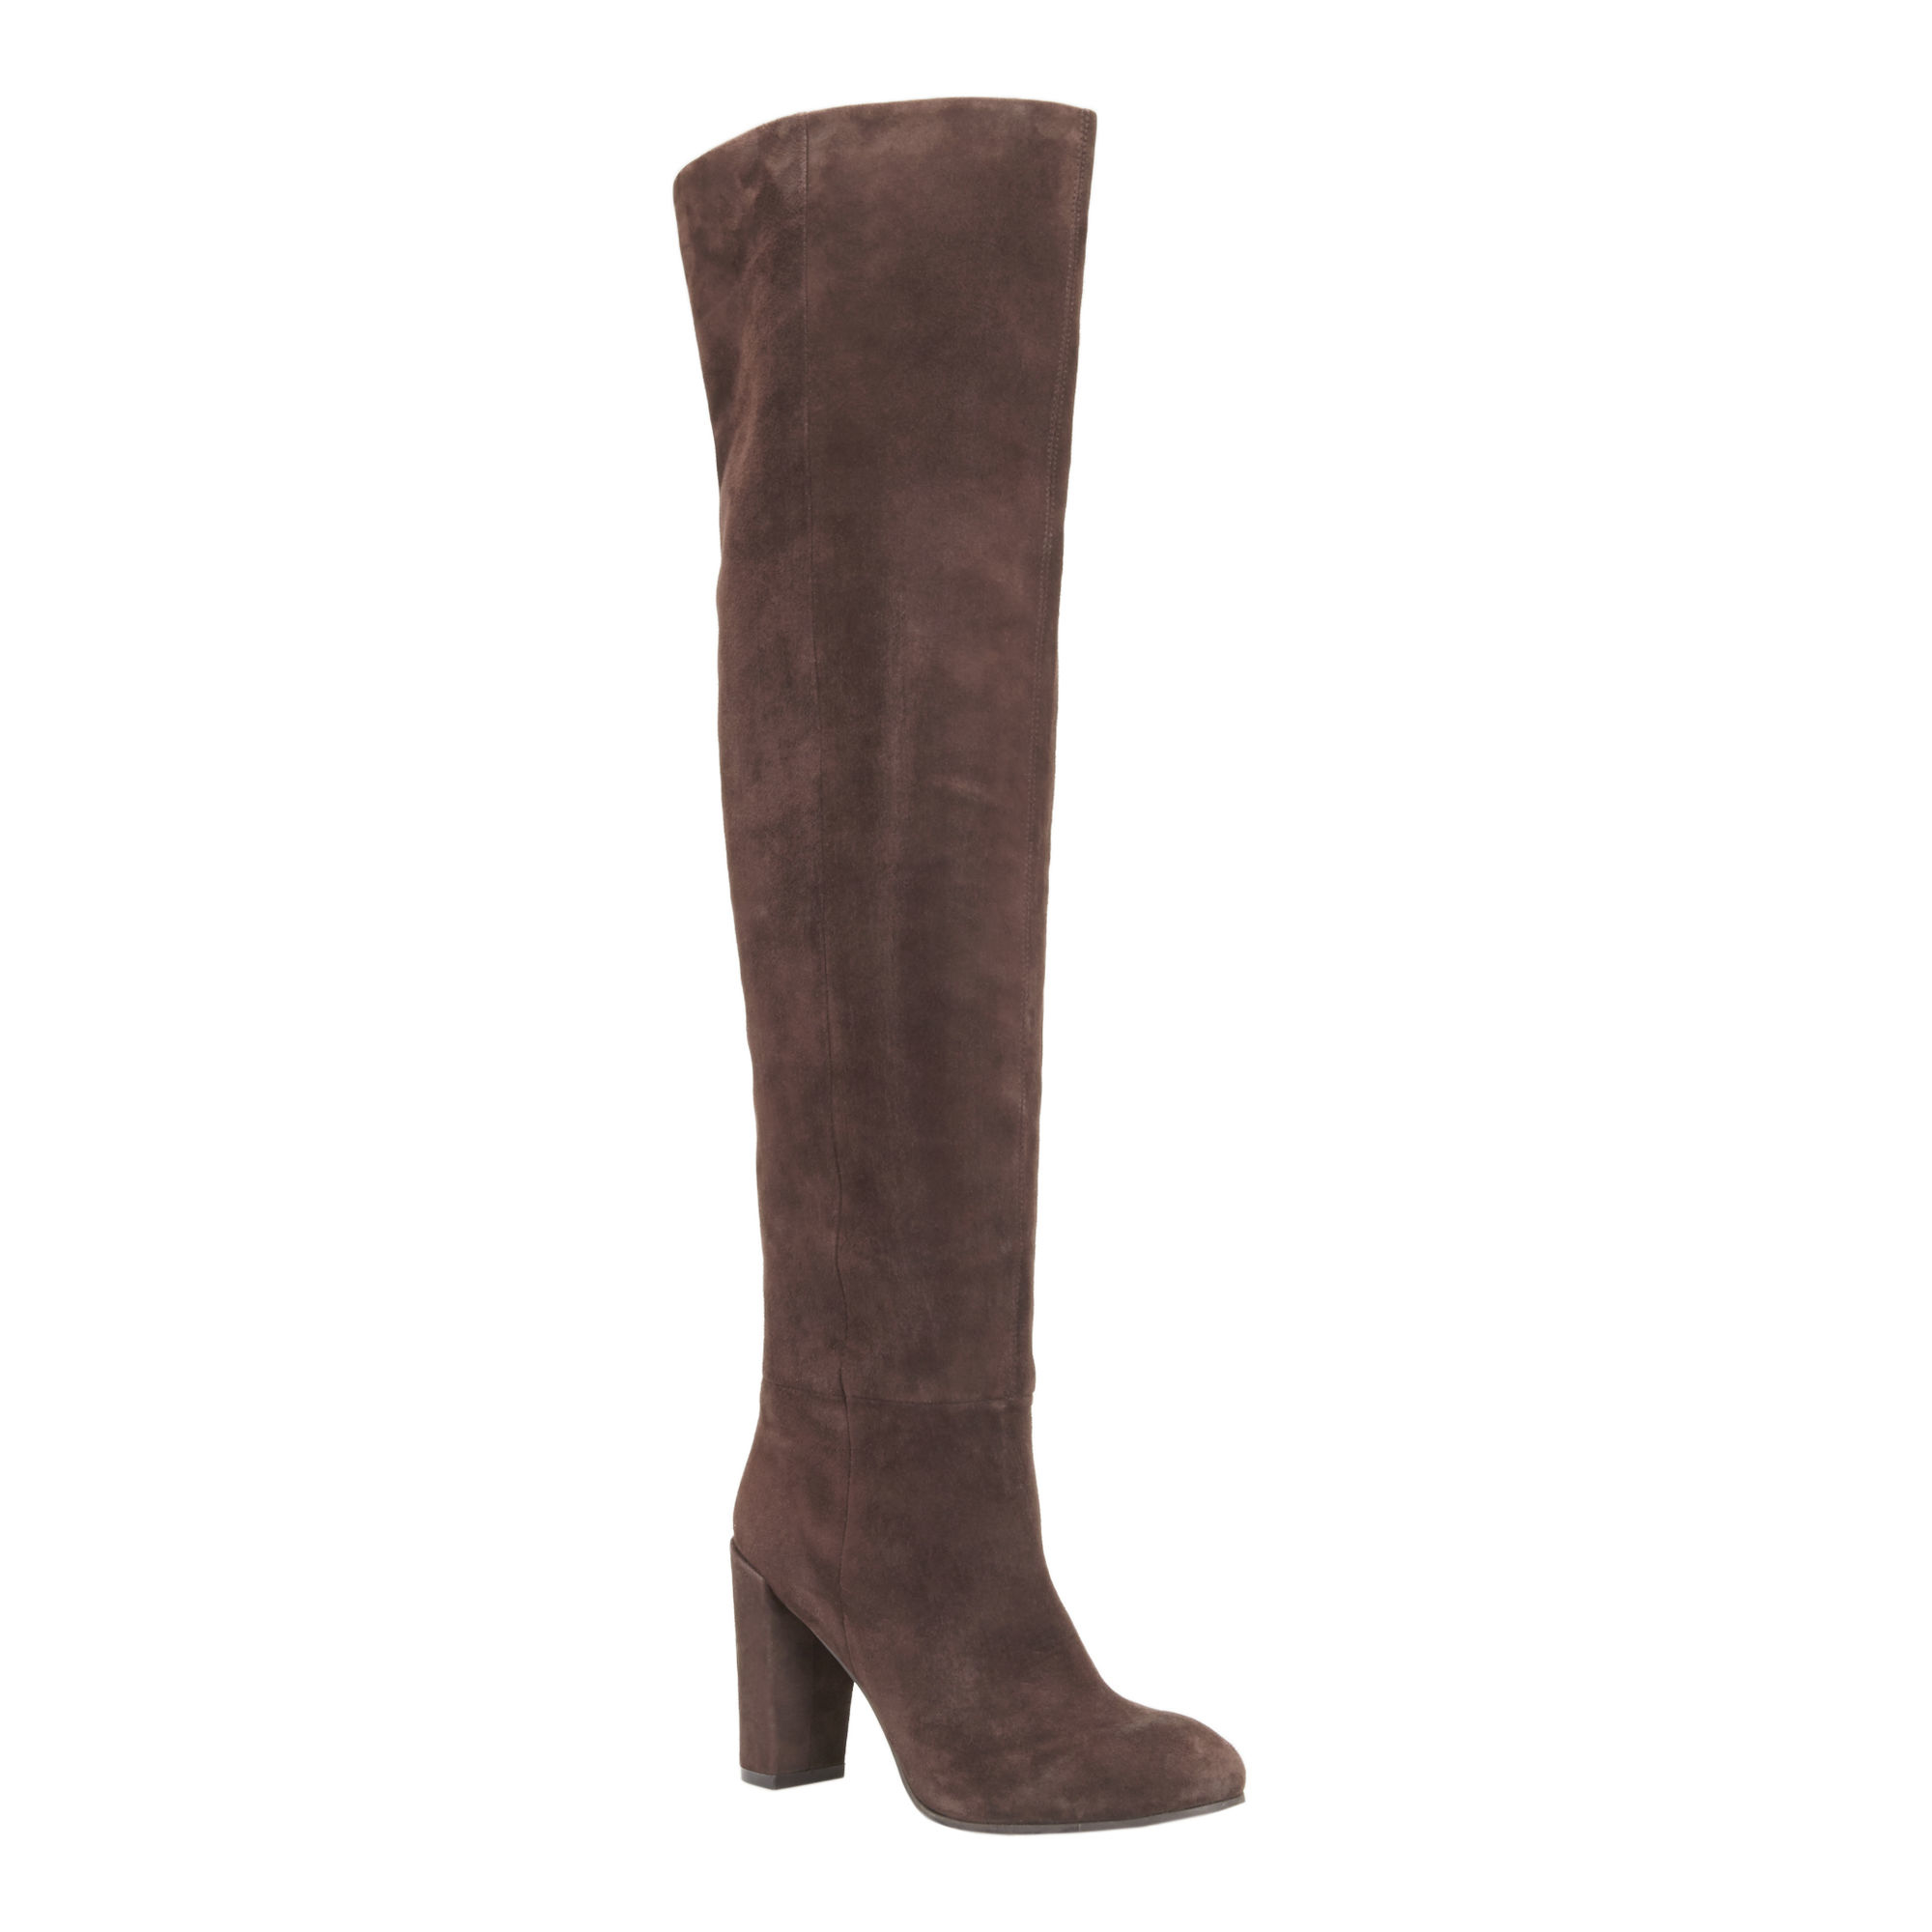 Lyst - Nine West Snowfall Over The Knee Boots in Brown